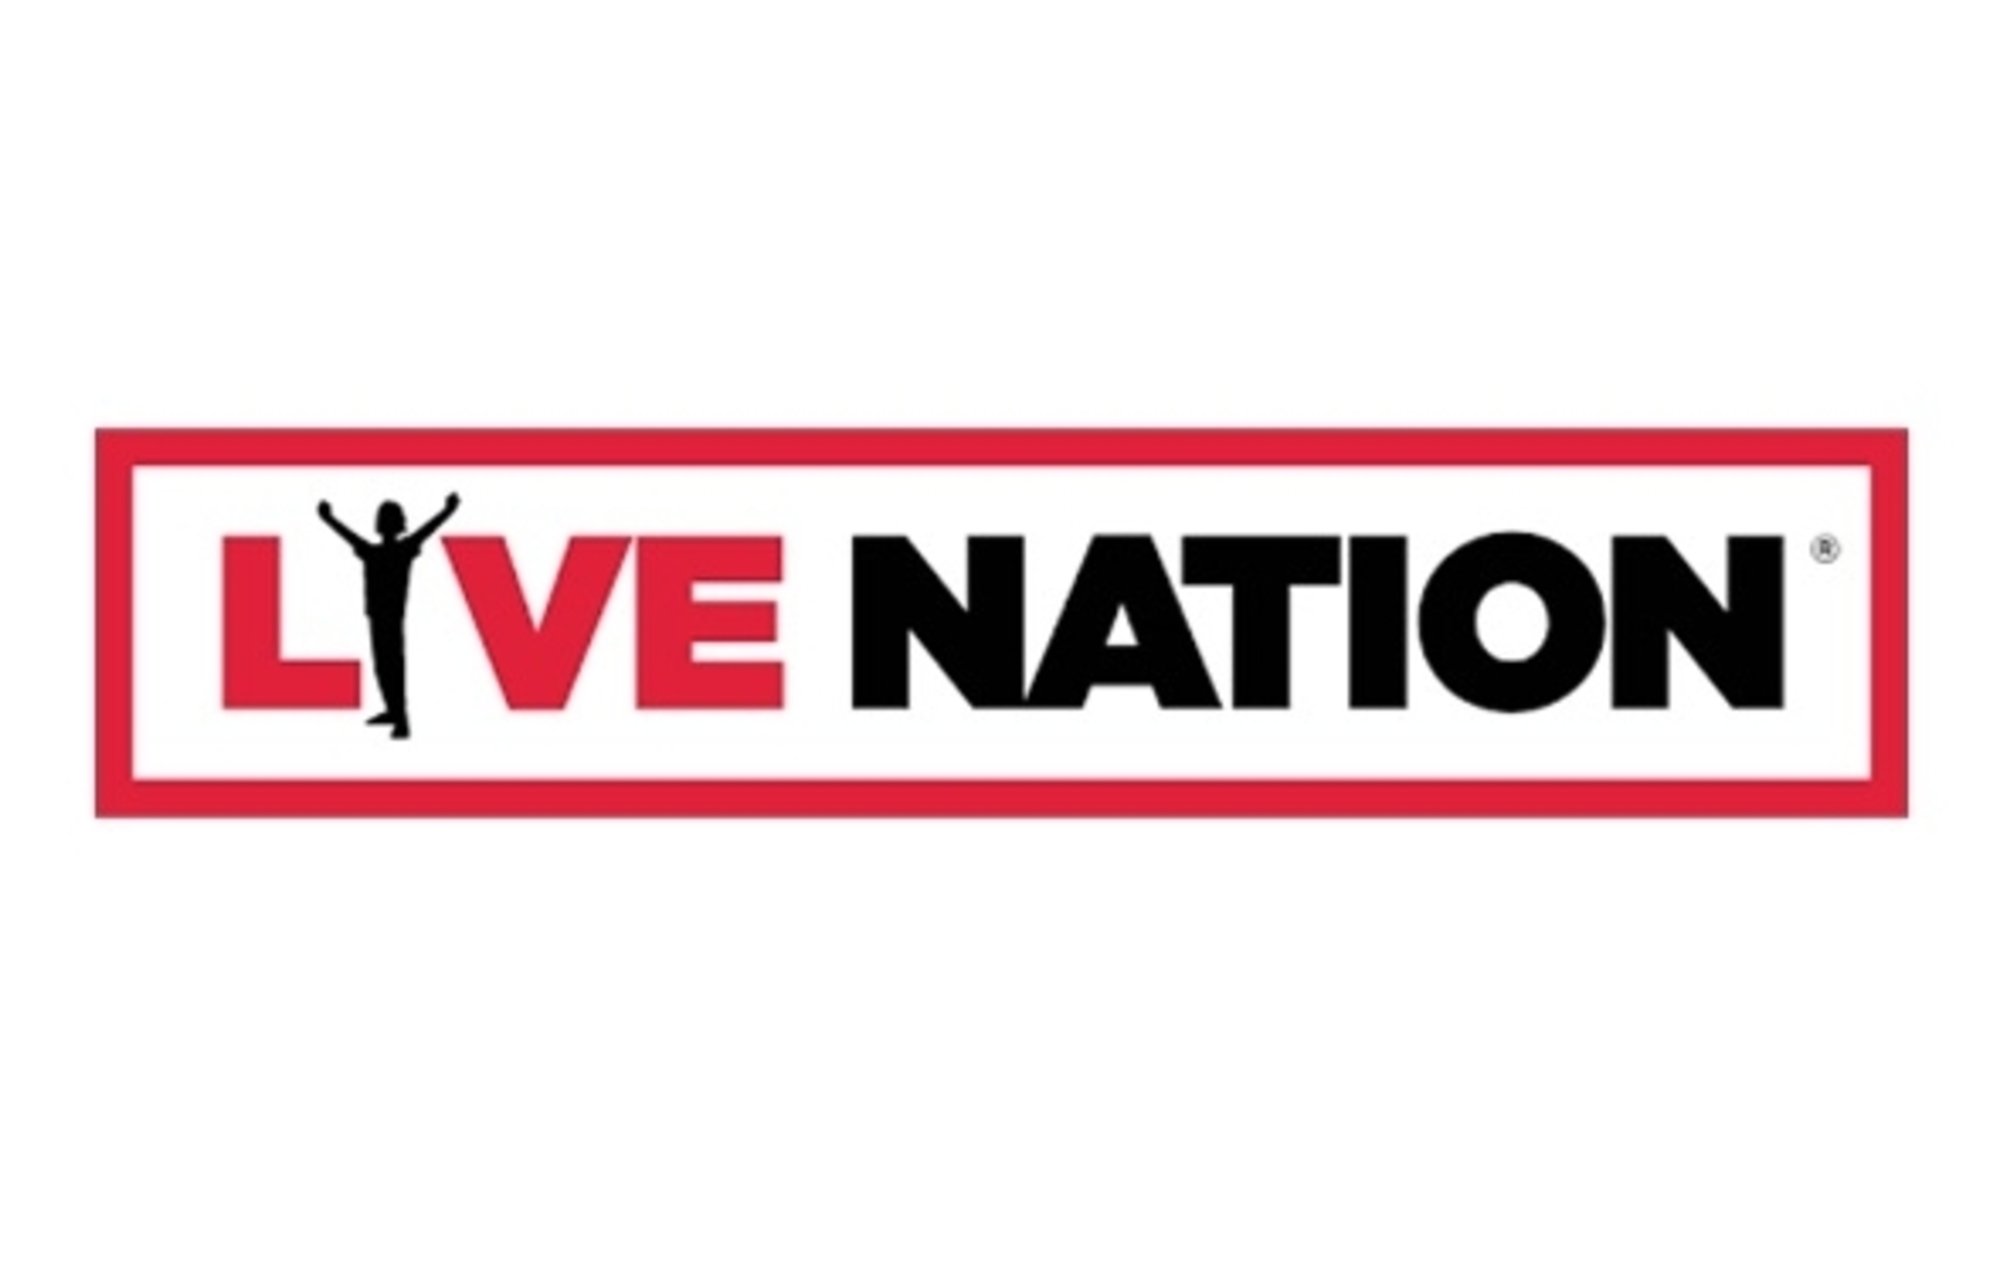 Live Nation to be sued by US Justice Department over violation of antitrust laws